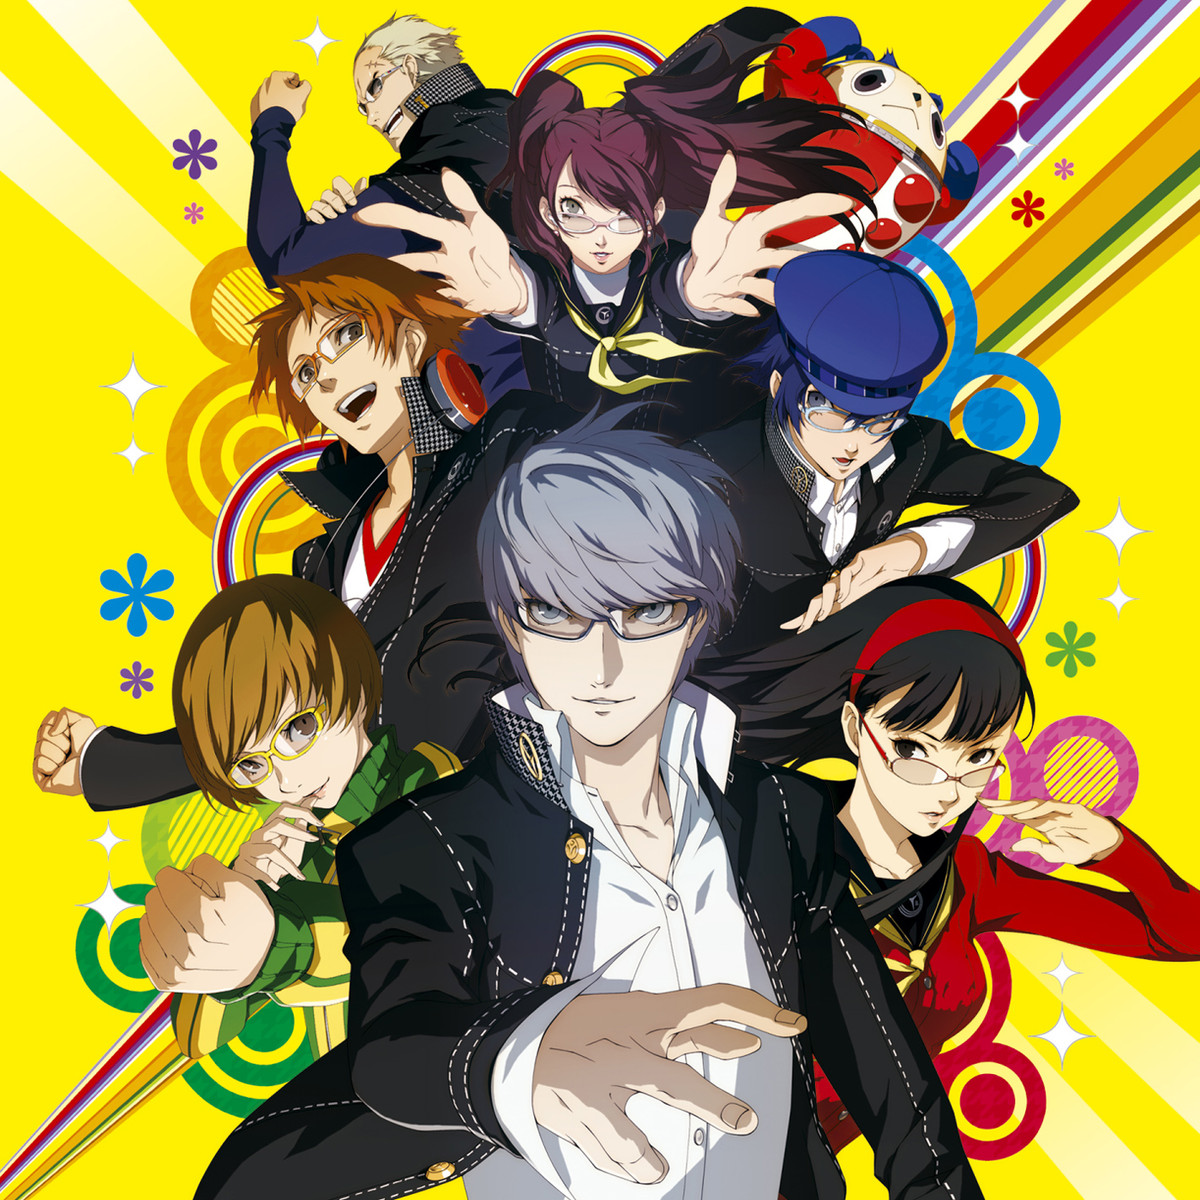 Review: Persona 4: Golden